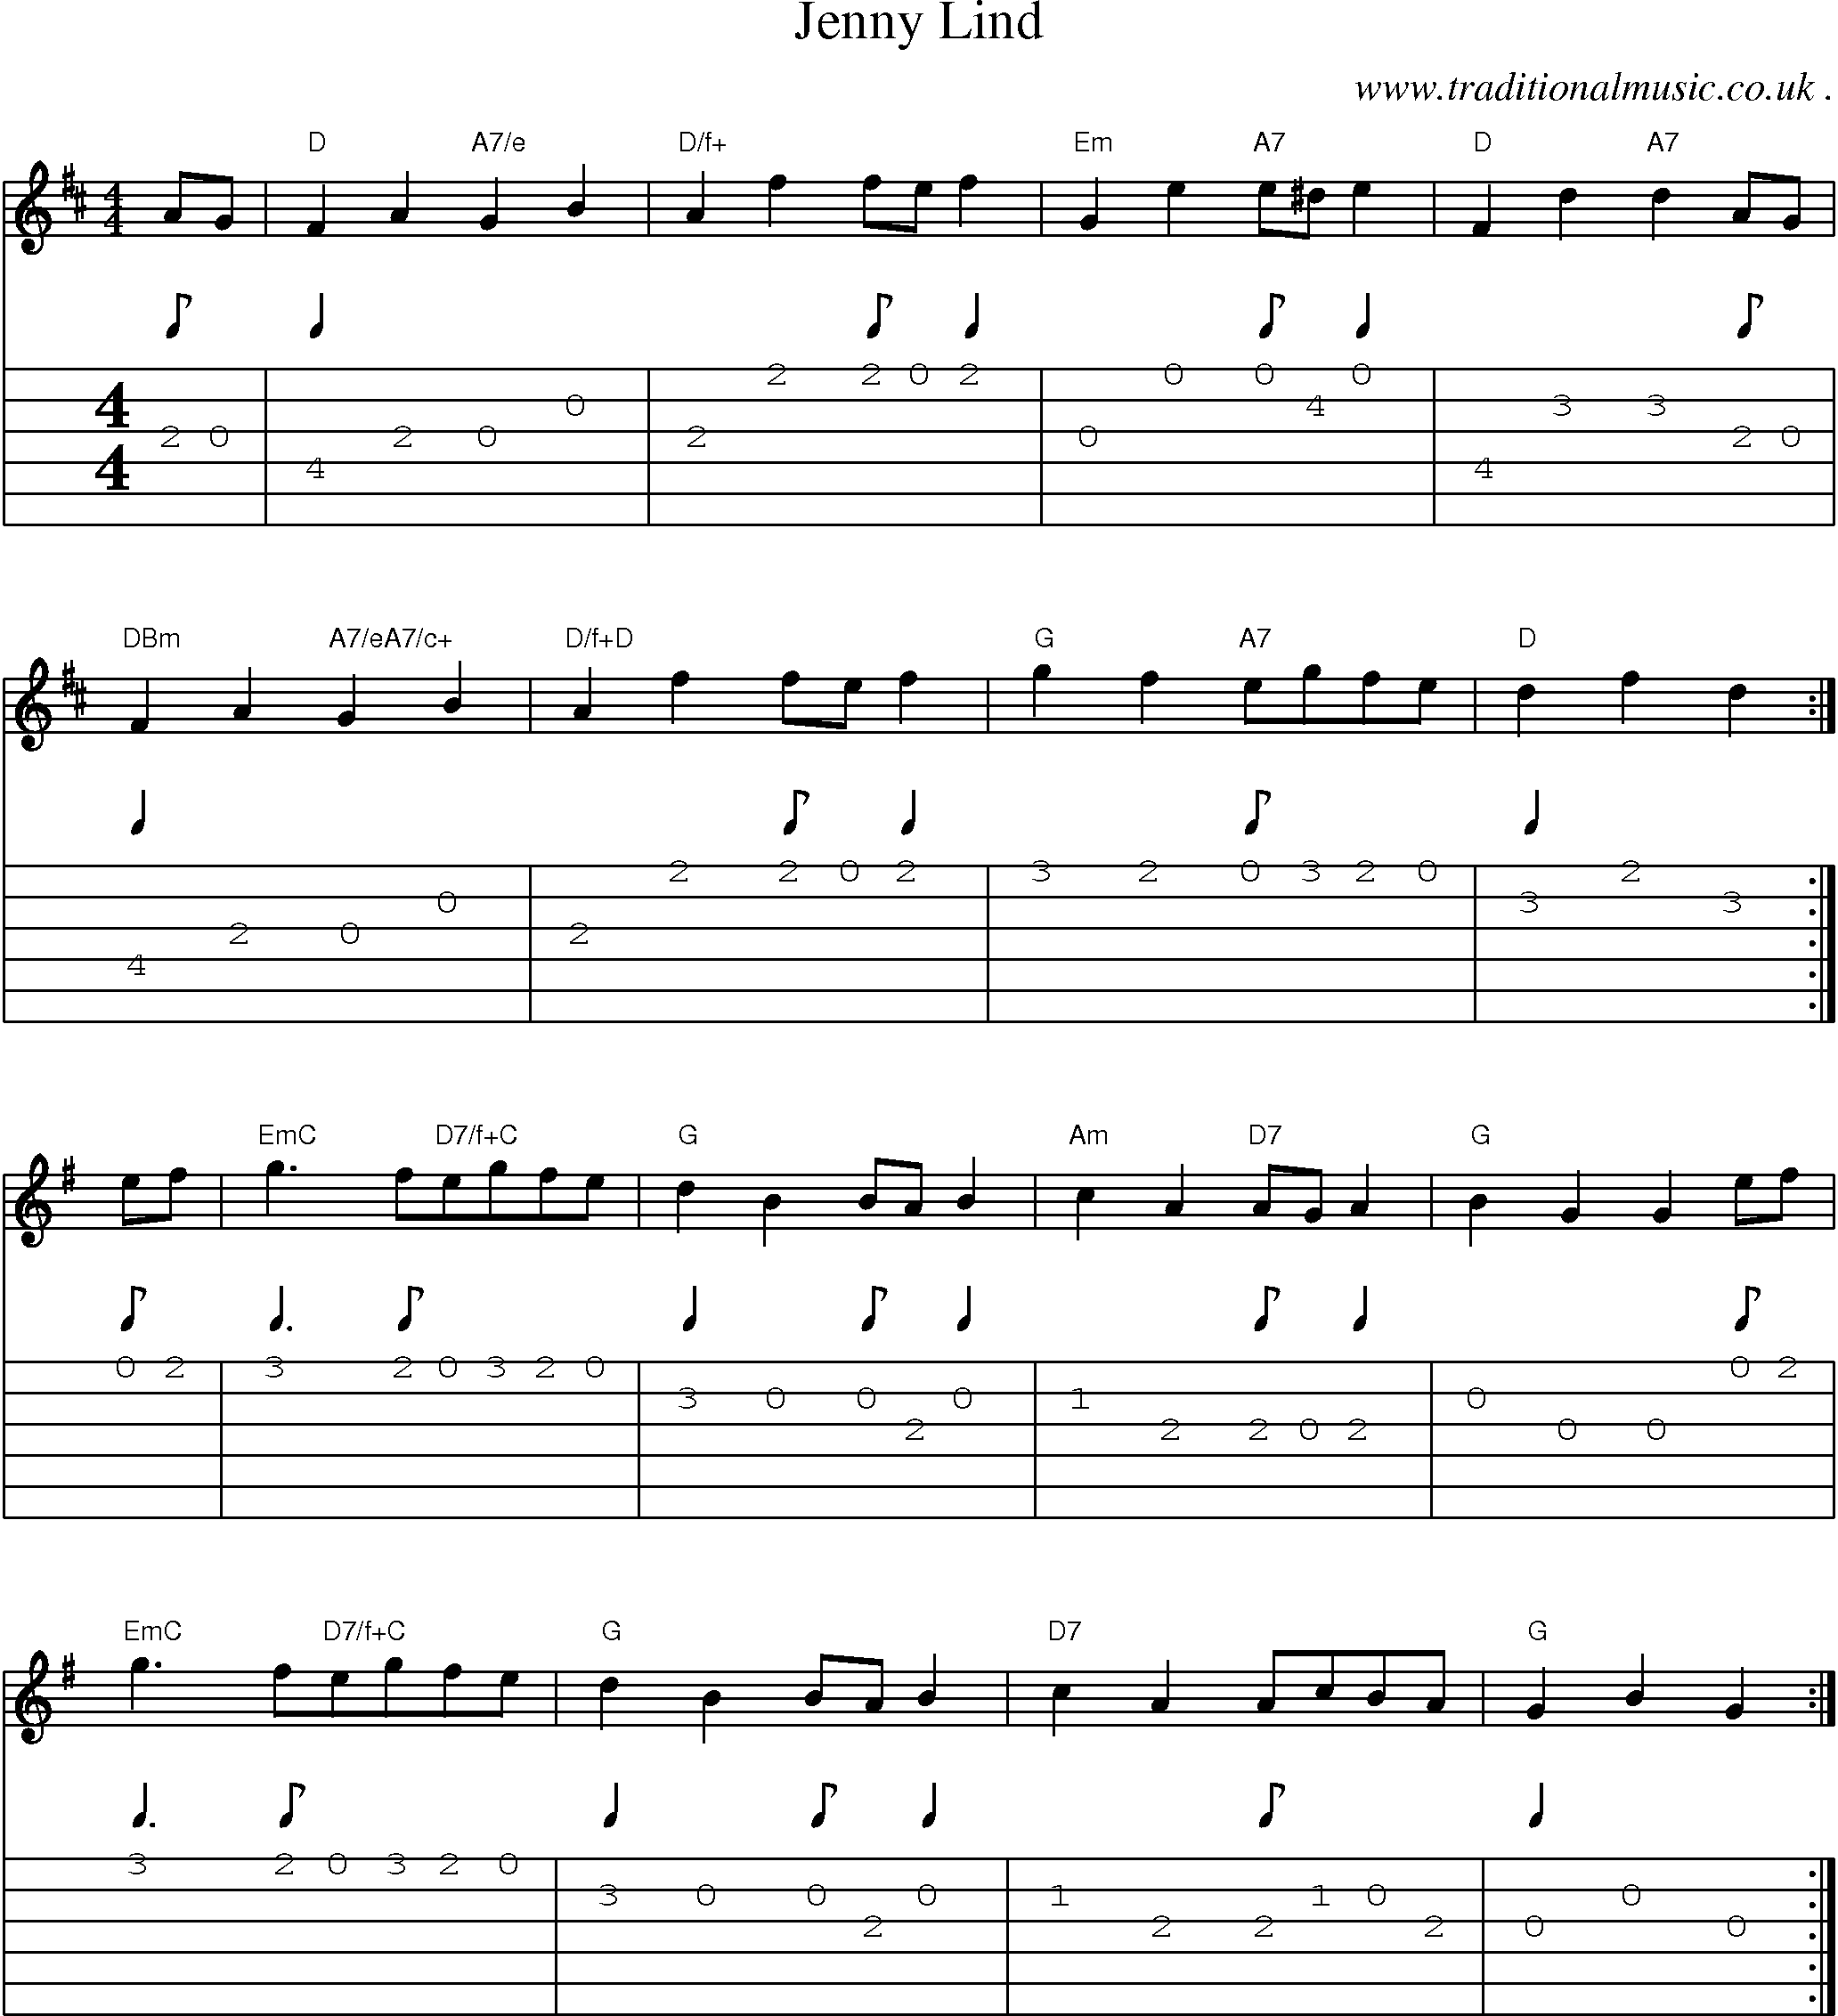 Sheet-Music and Guitar Tabs for Jenny Lind